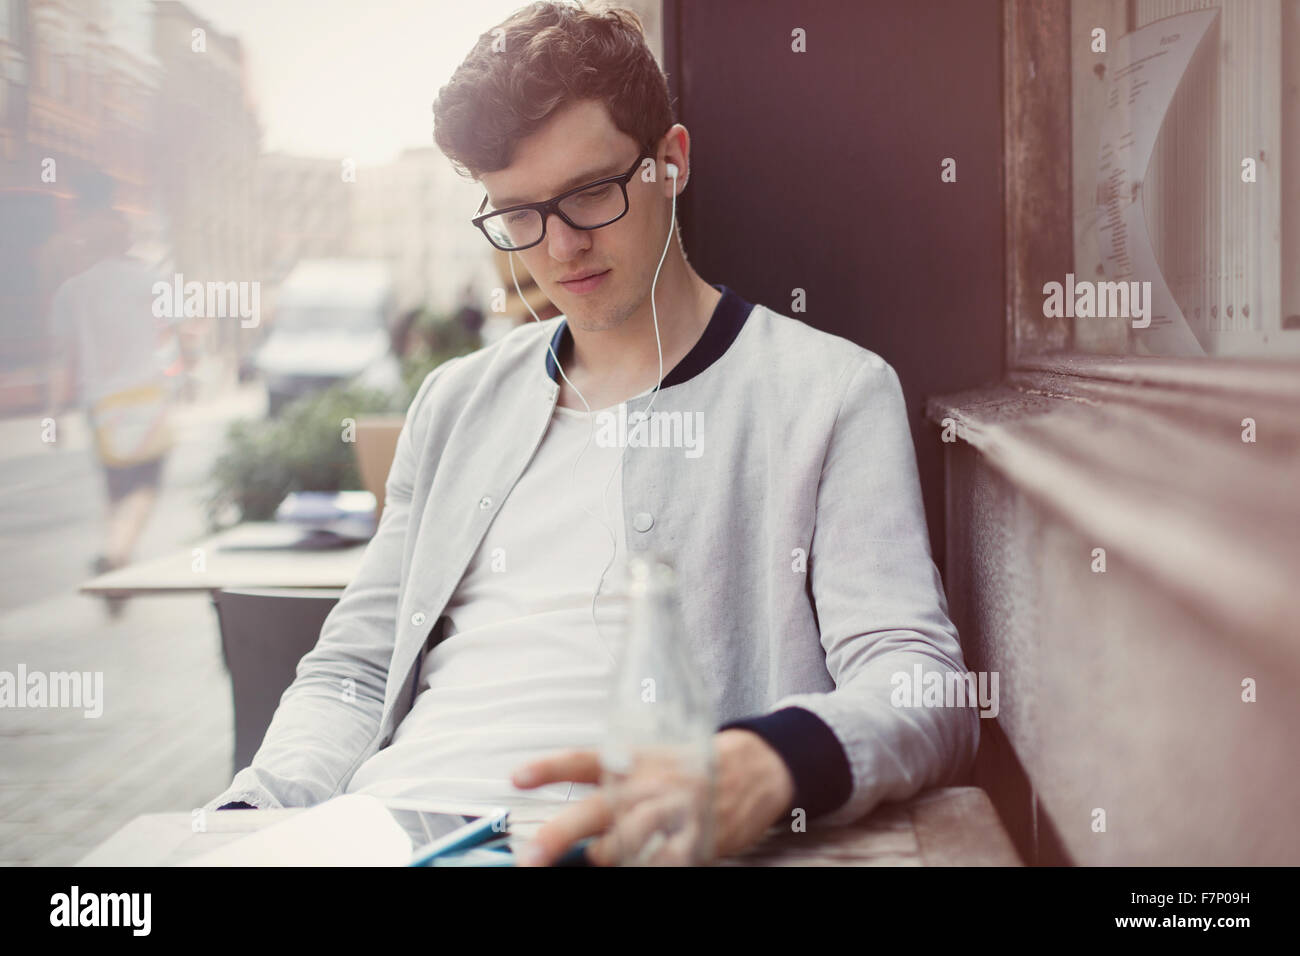 Young man with eyeglasses and headphones using digital tablet at sidewalk cafe Stock Photo